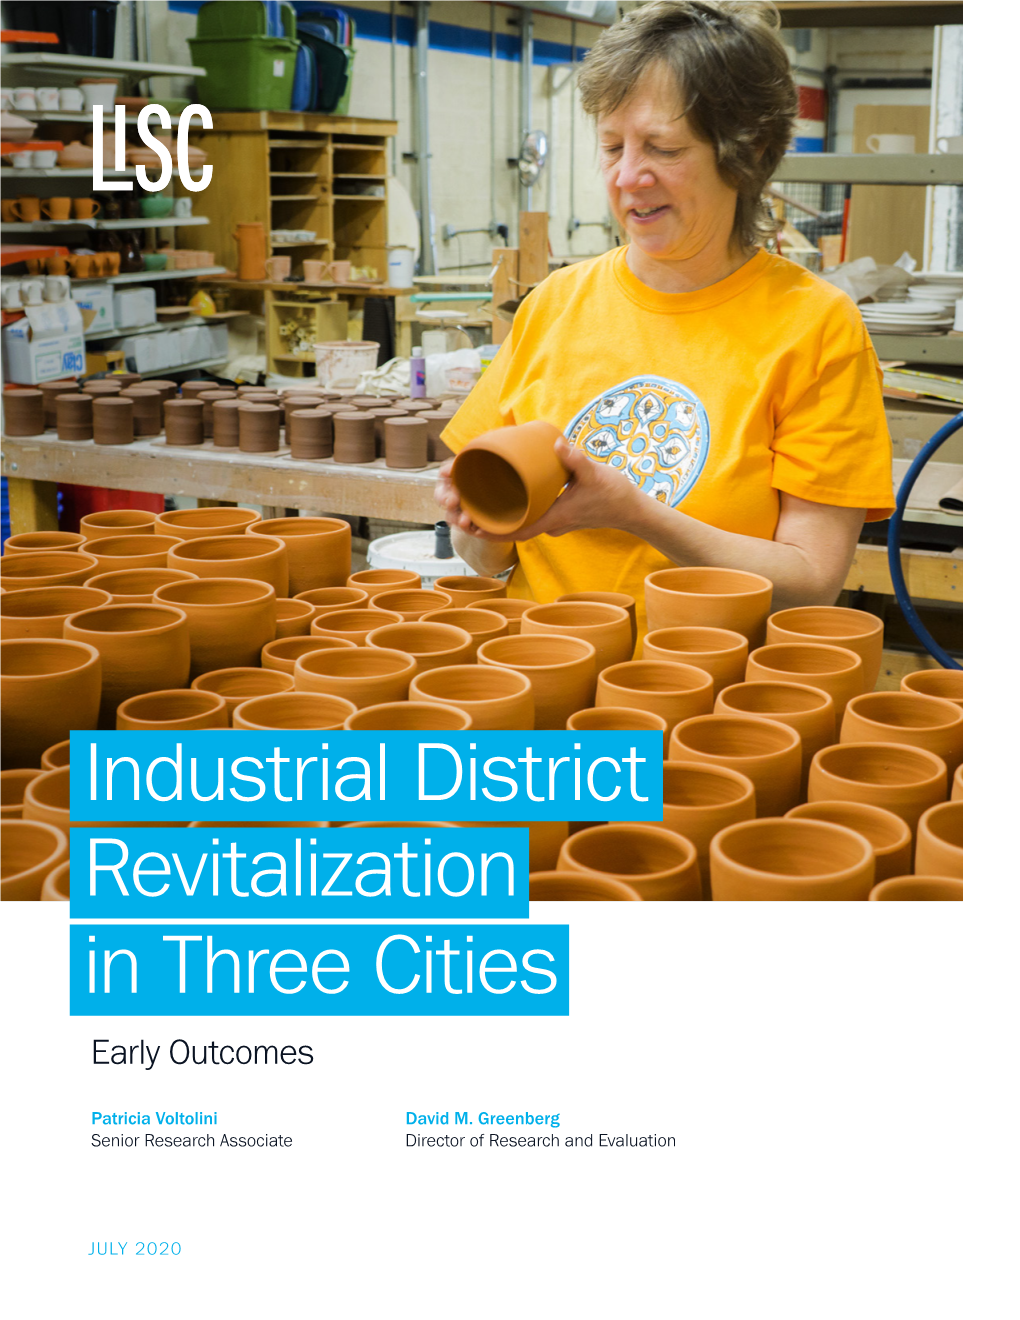 Industrial District Revitalization in Three Cities Early Outcomes